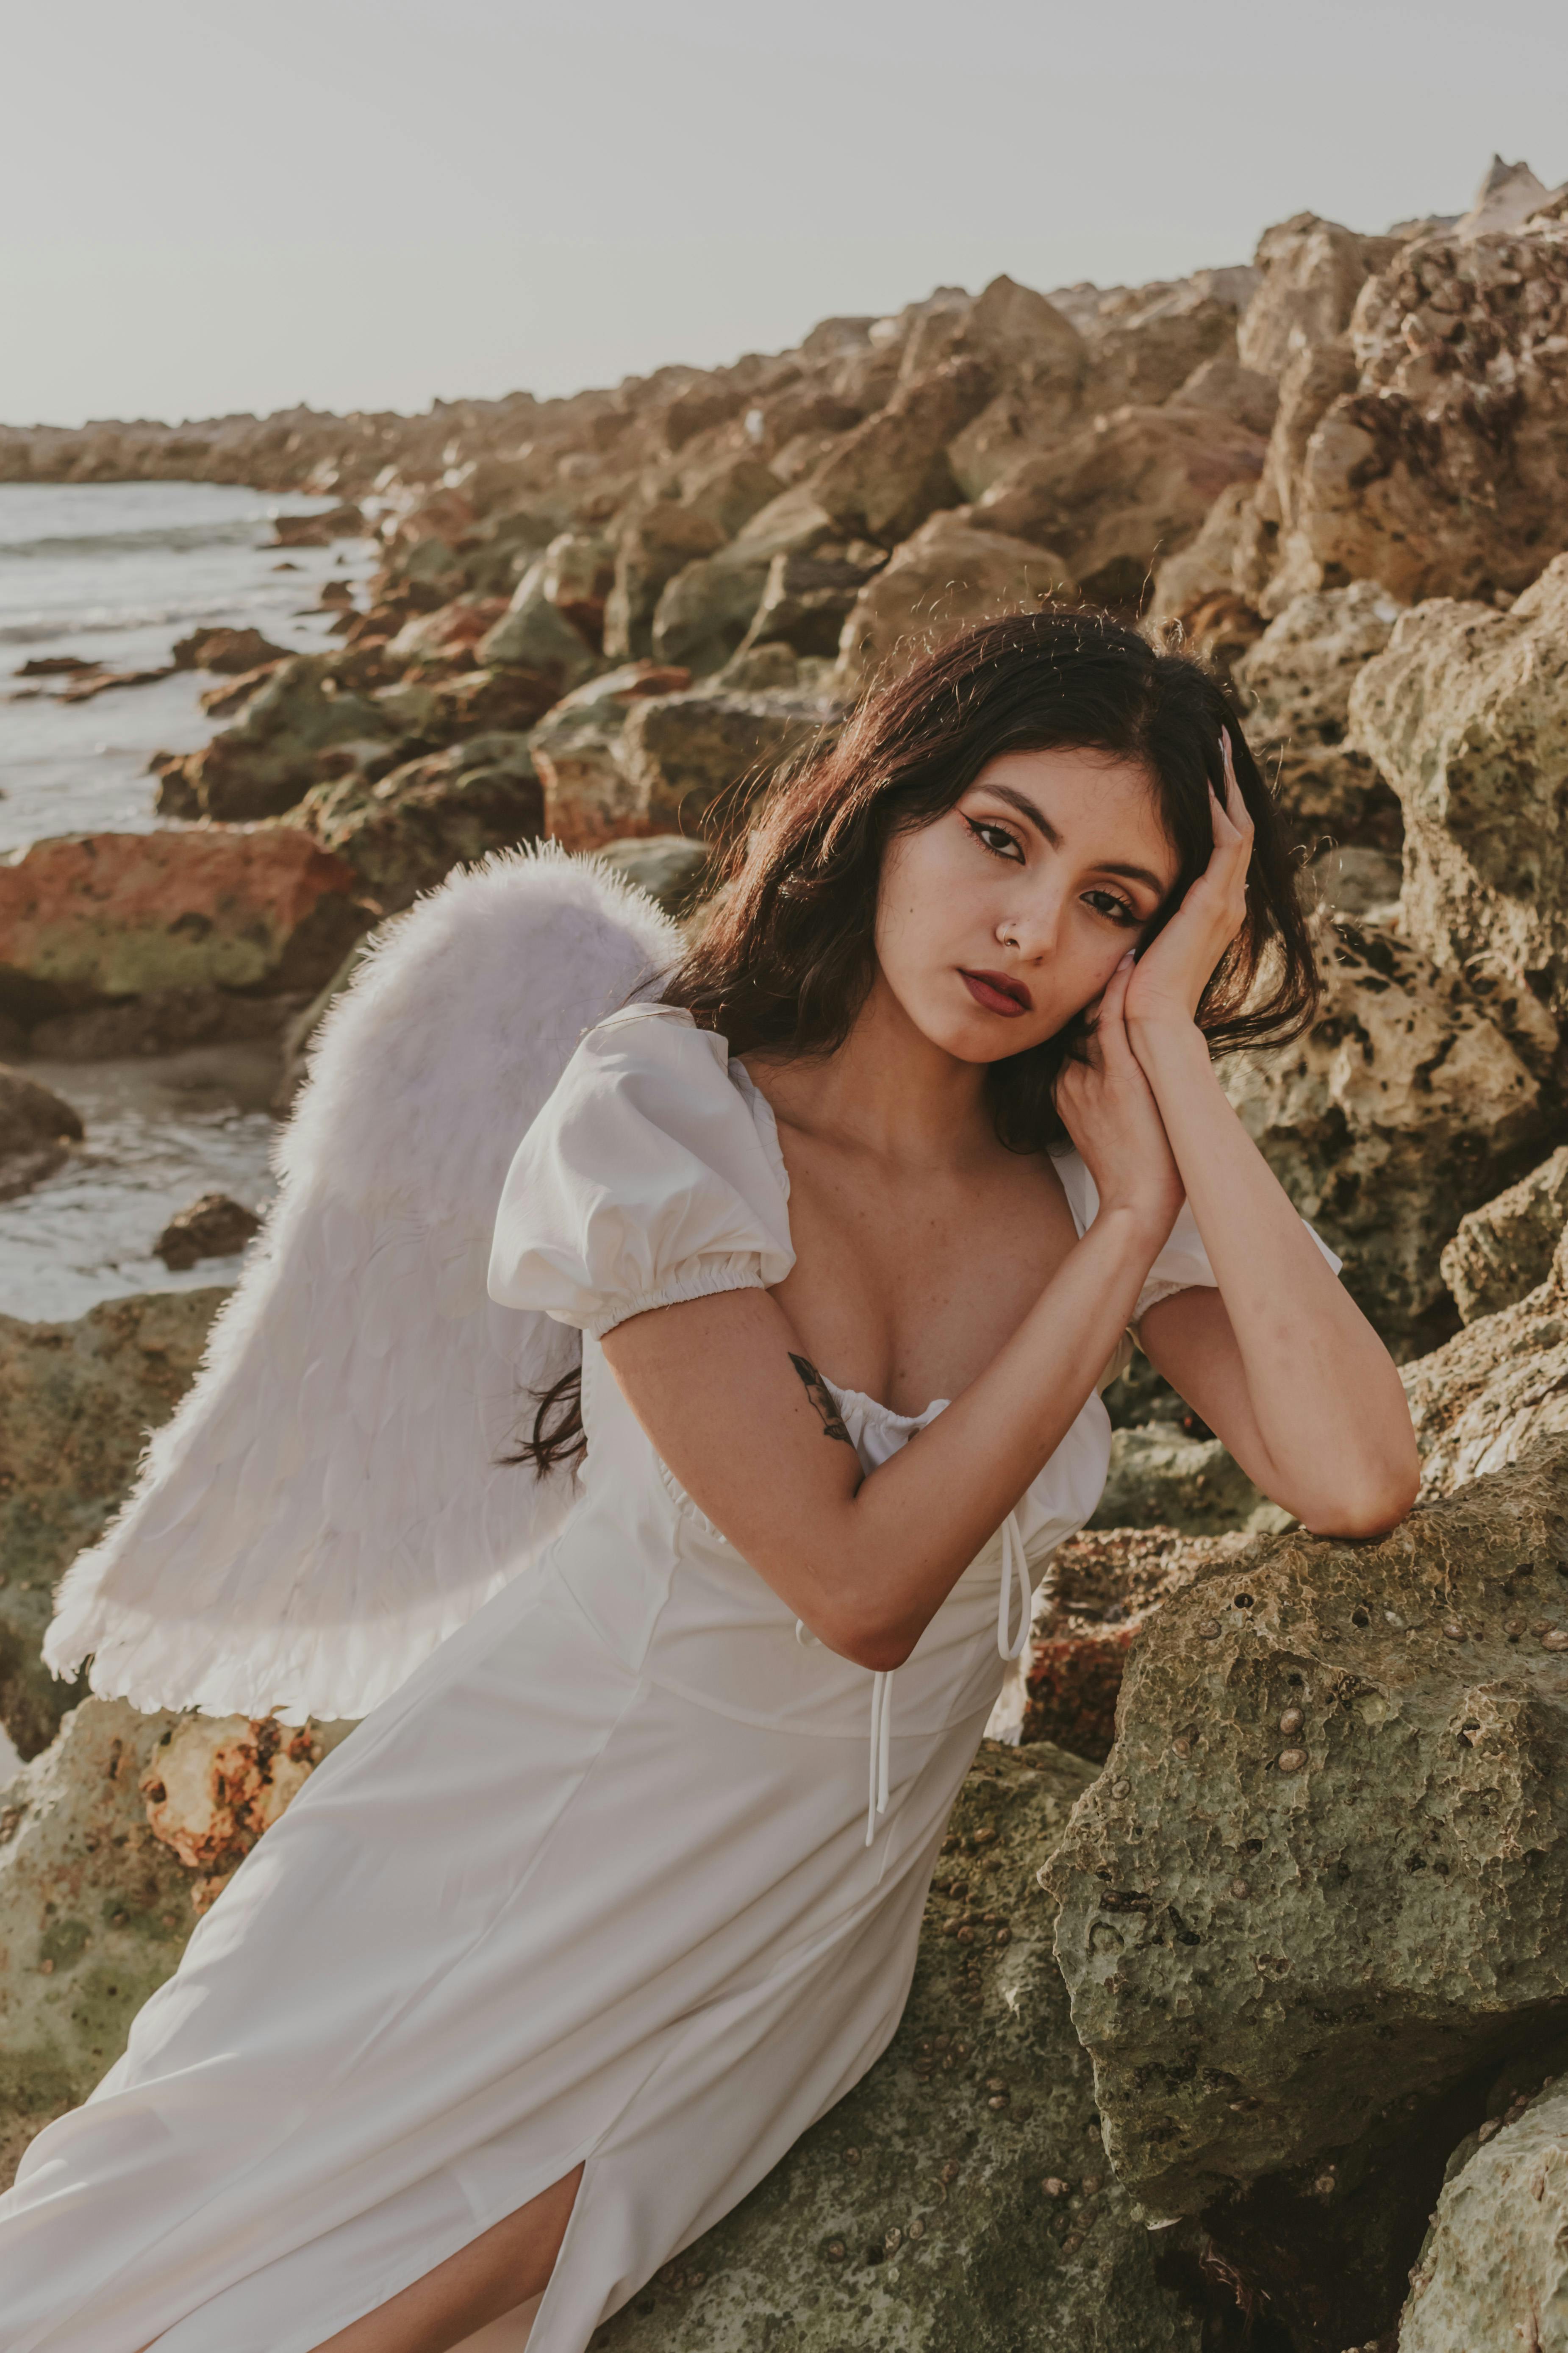 Young Girl Angel White Dress Wings Stock Photo 1512299786 | Shutterstock